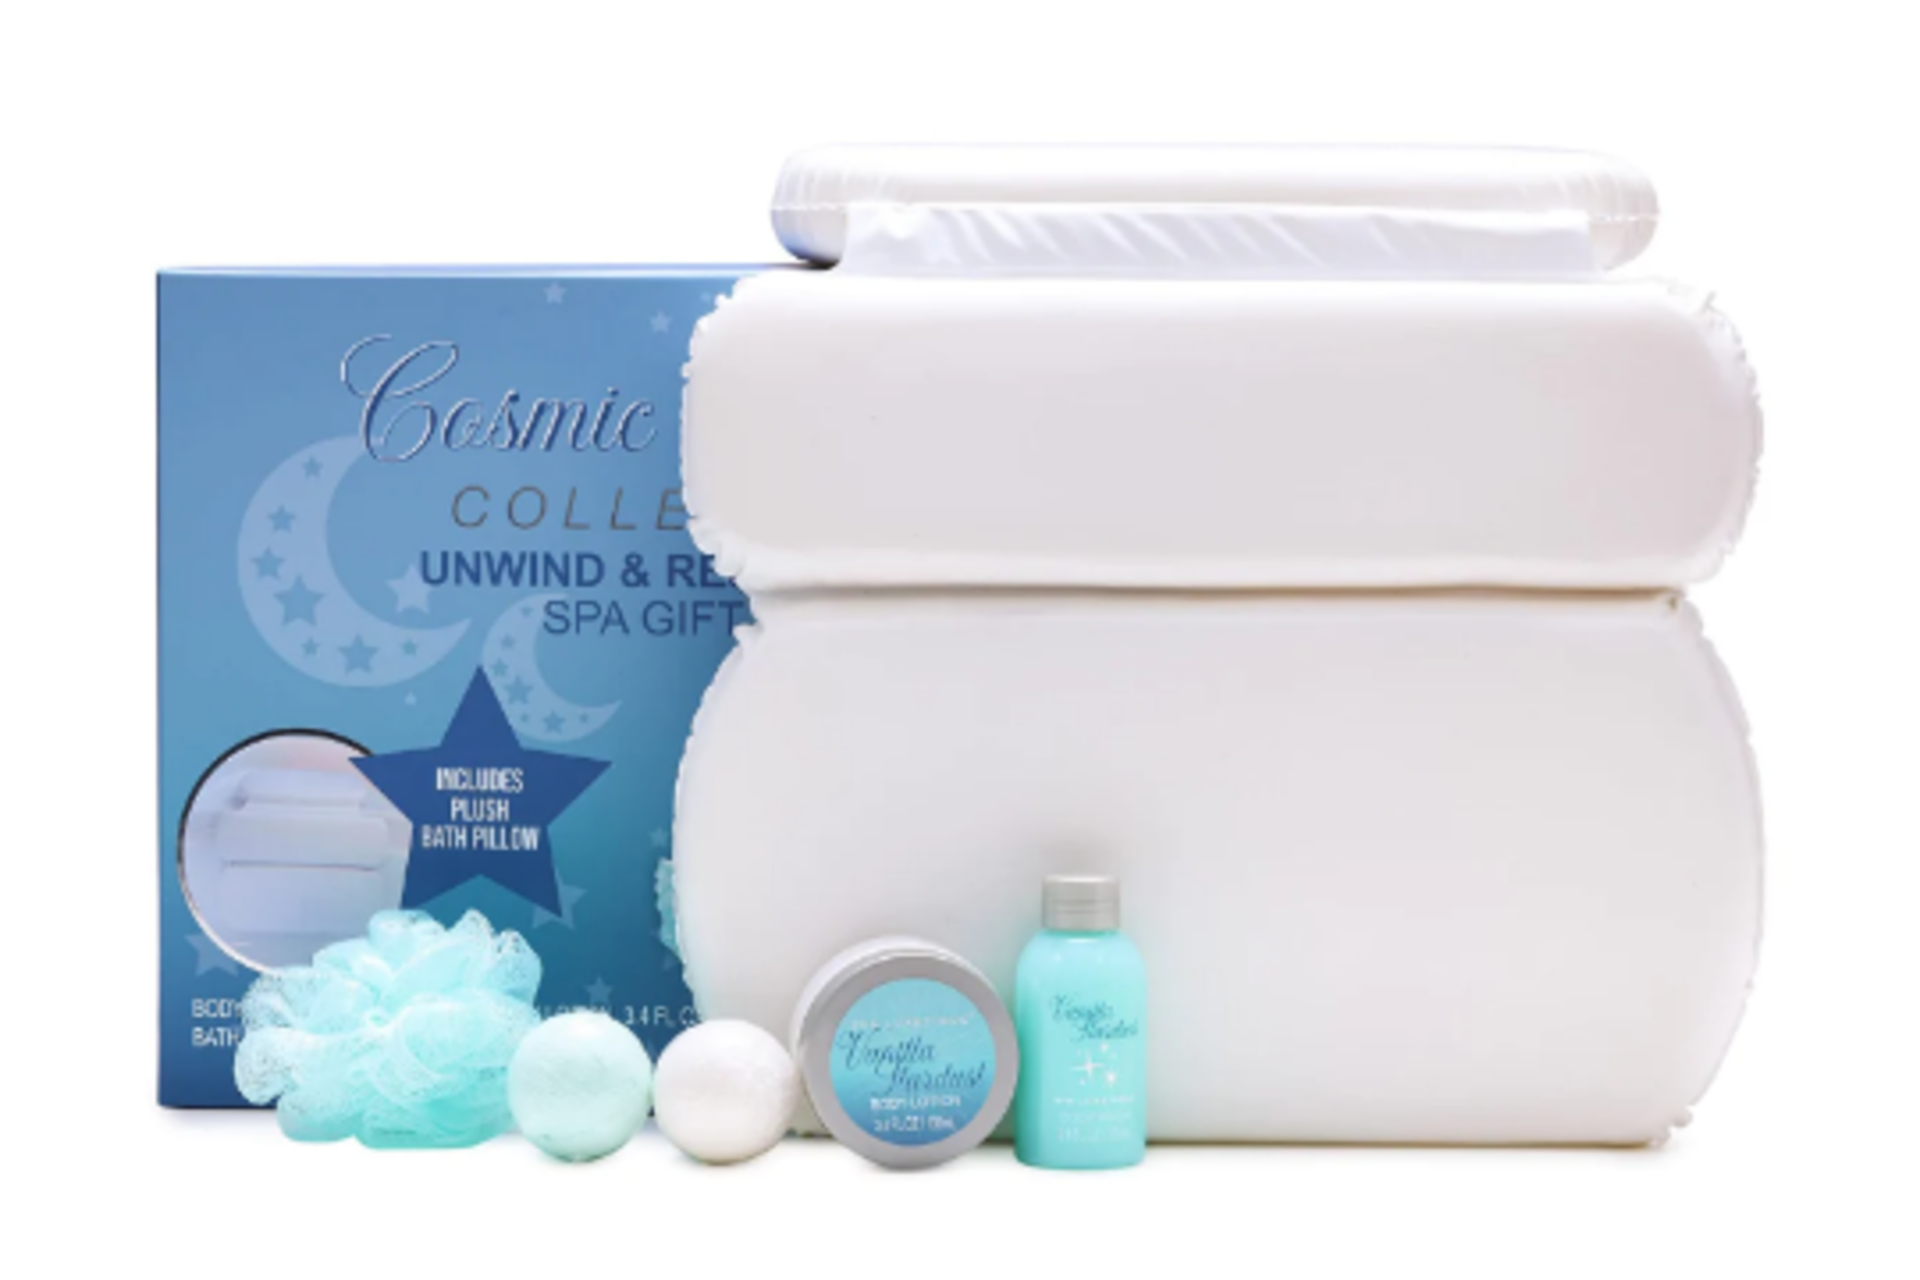 PALLET TO CONTAIN 24 x New Packaged Spa Luxetique Cosmic Dreams Vanilla Spa Gift Set. (SKU:SPA-BA-